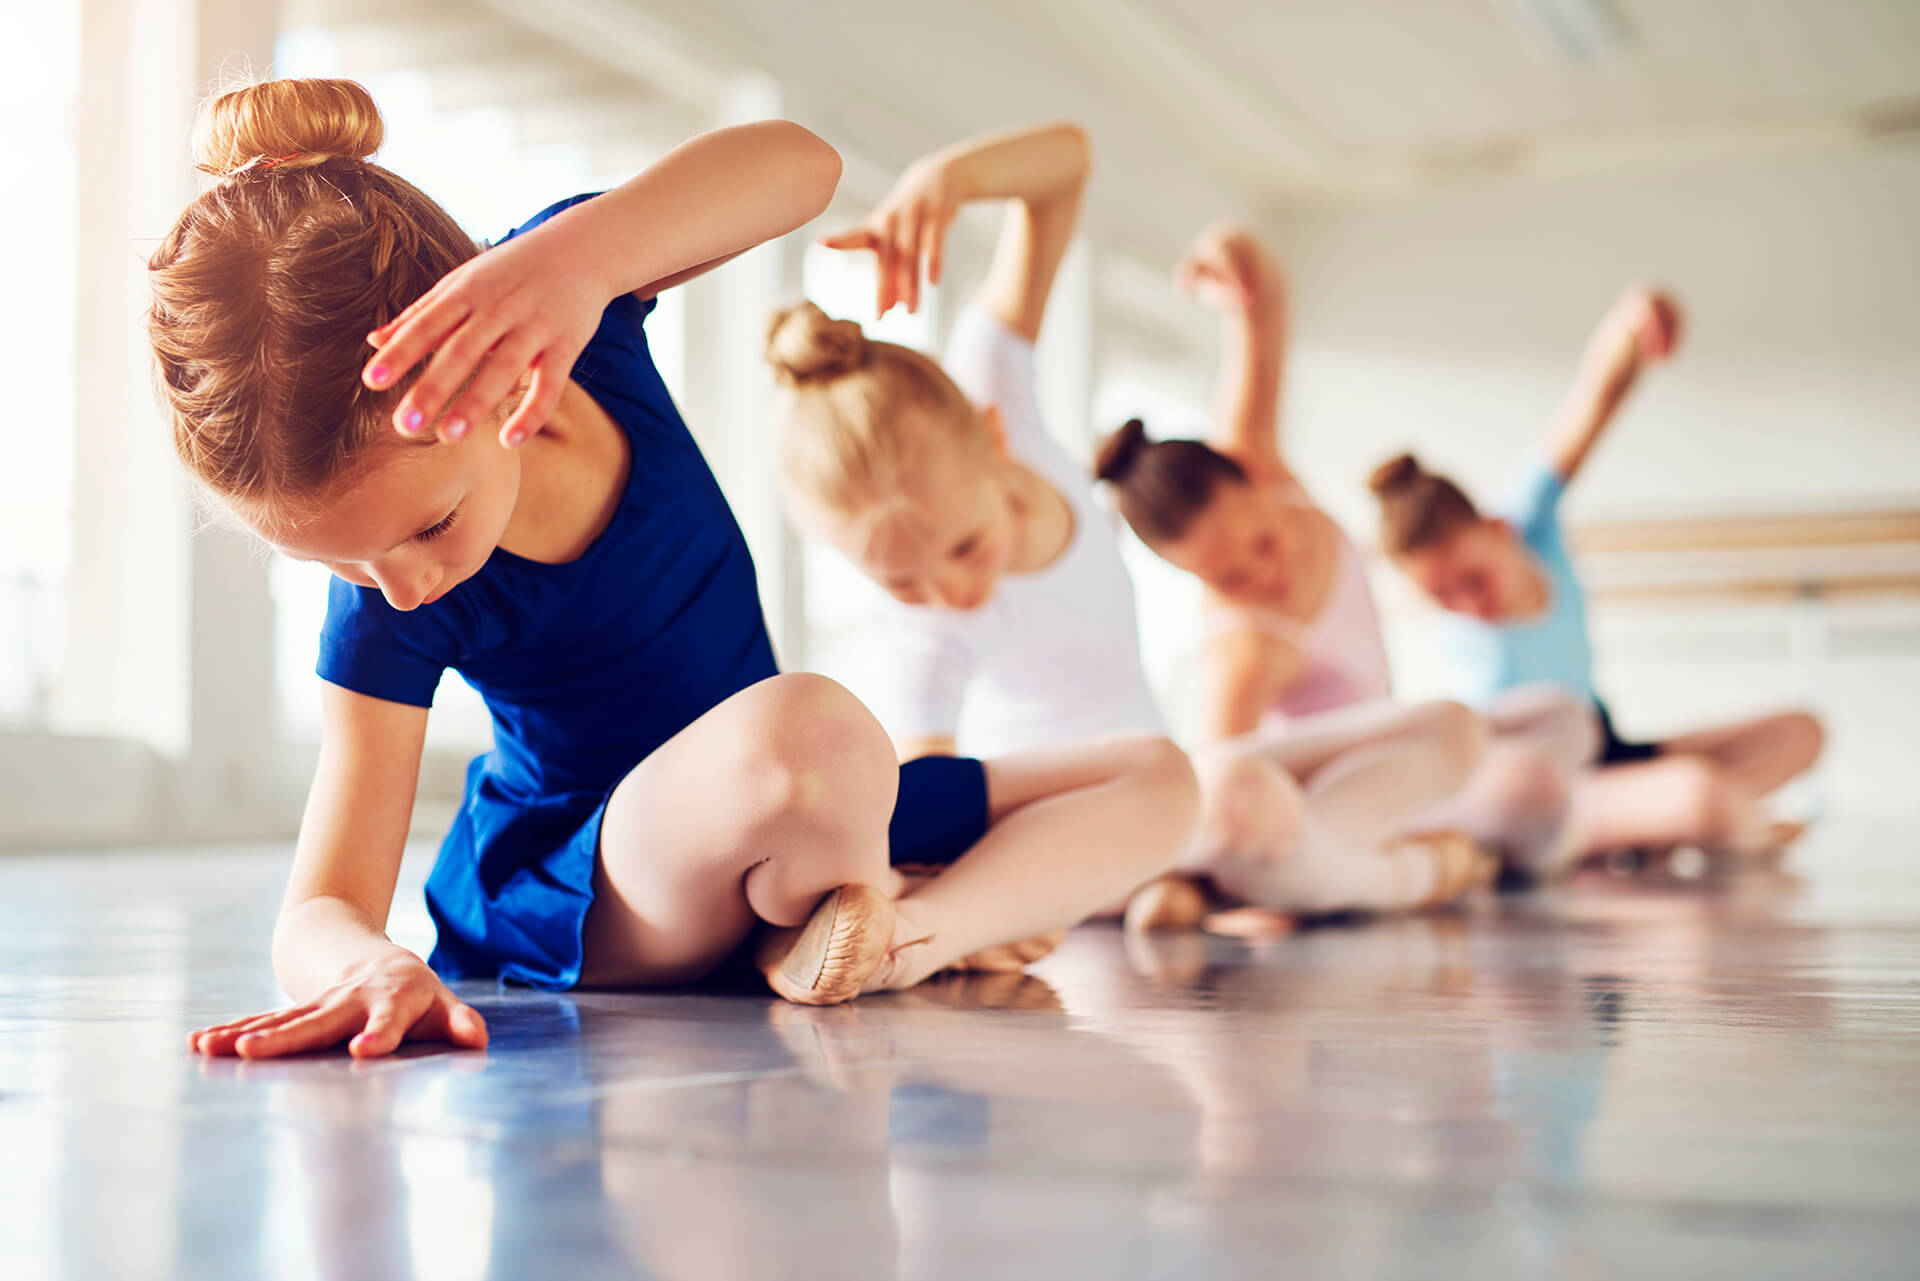 Childrens choreographic clubs: Discover the magic of dance with us!